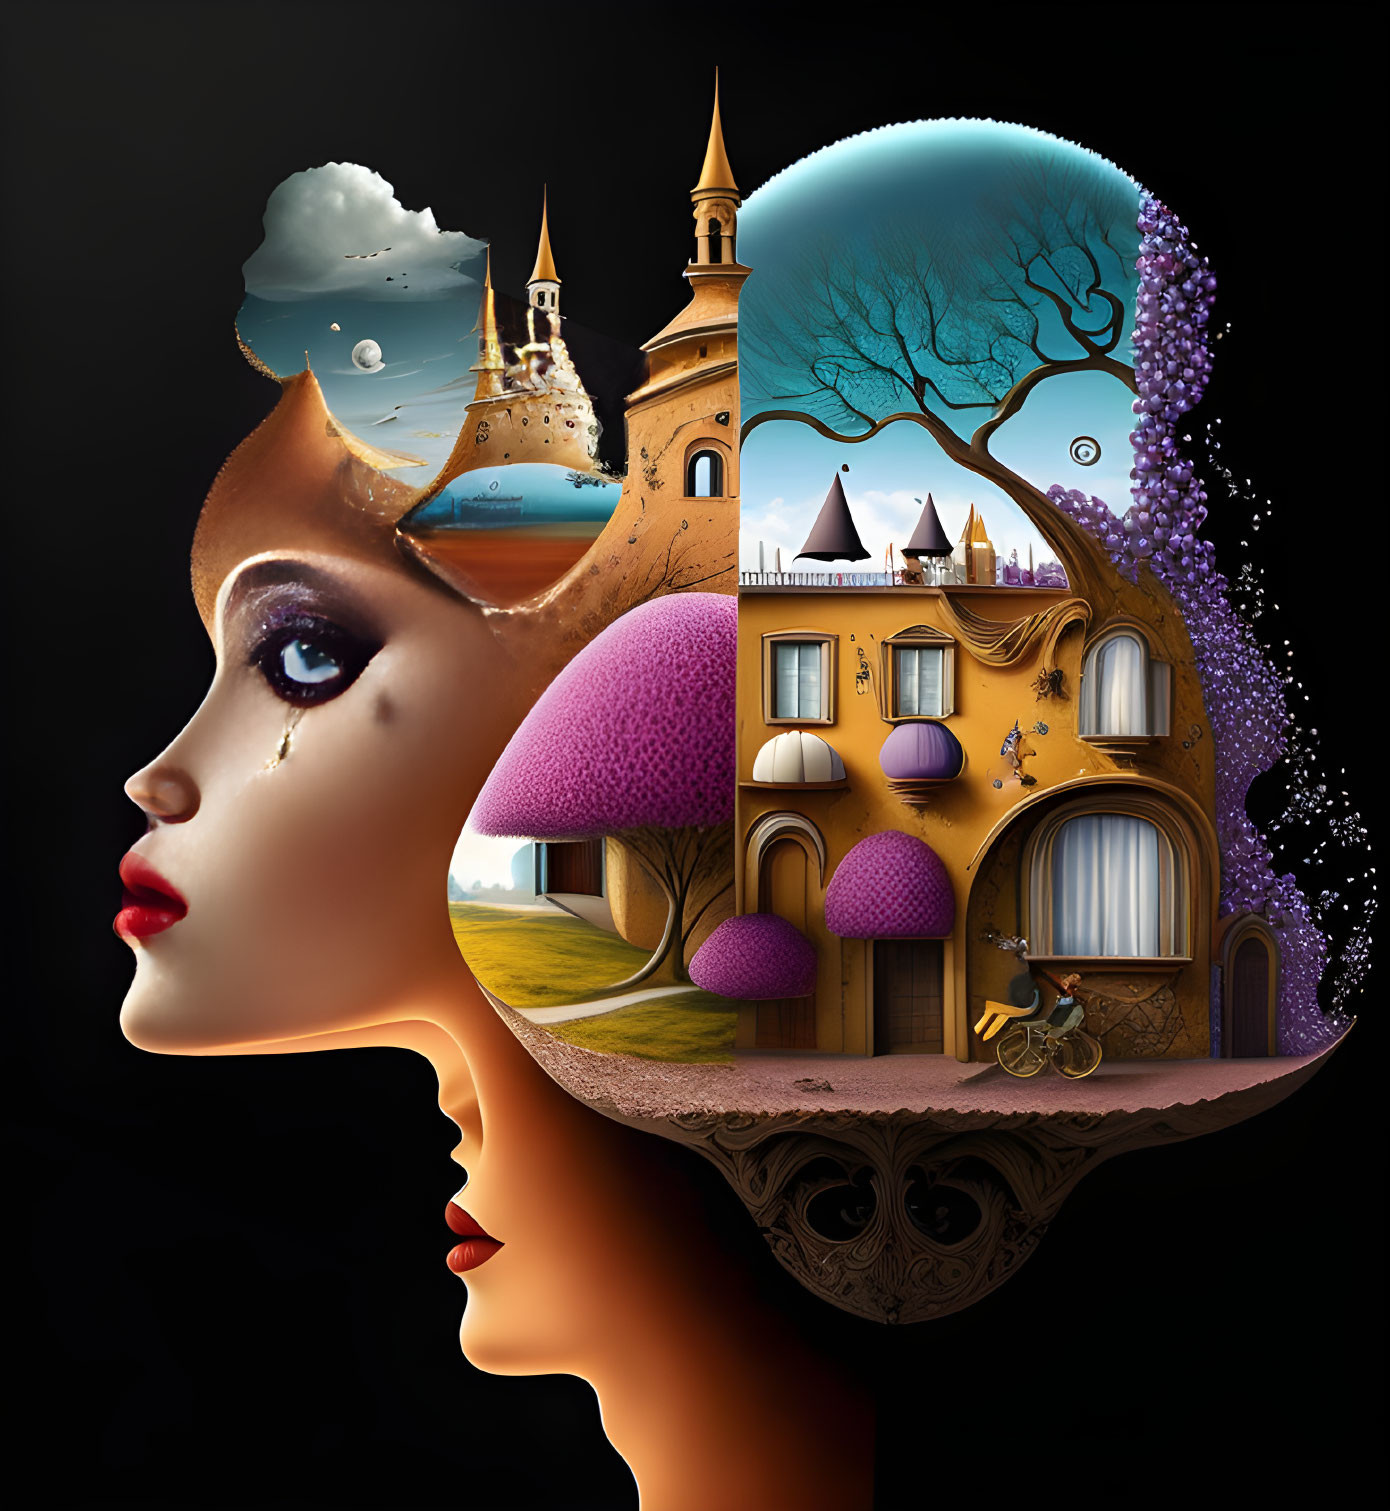 Woman's head merges with whimsical landscape in surreal profile